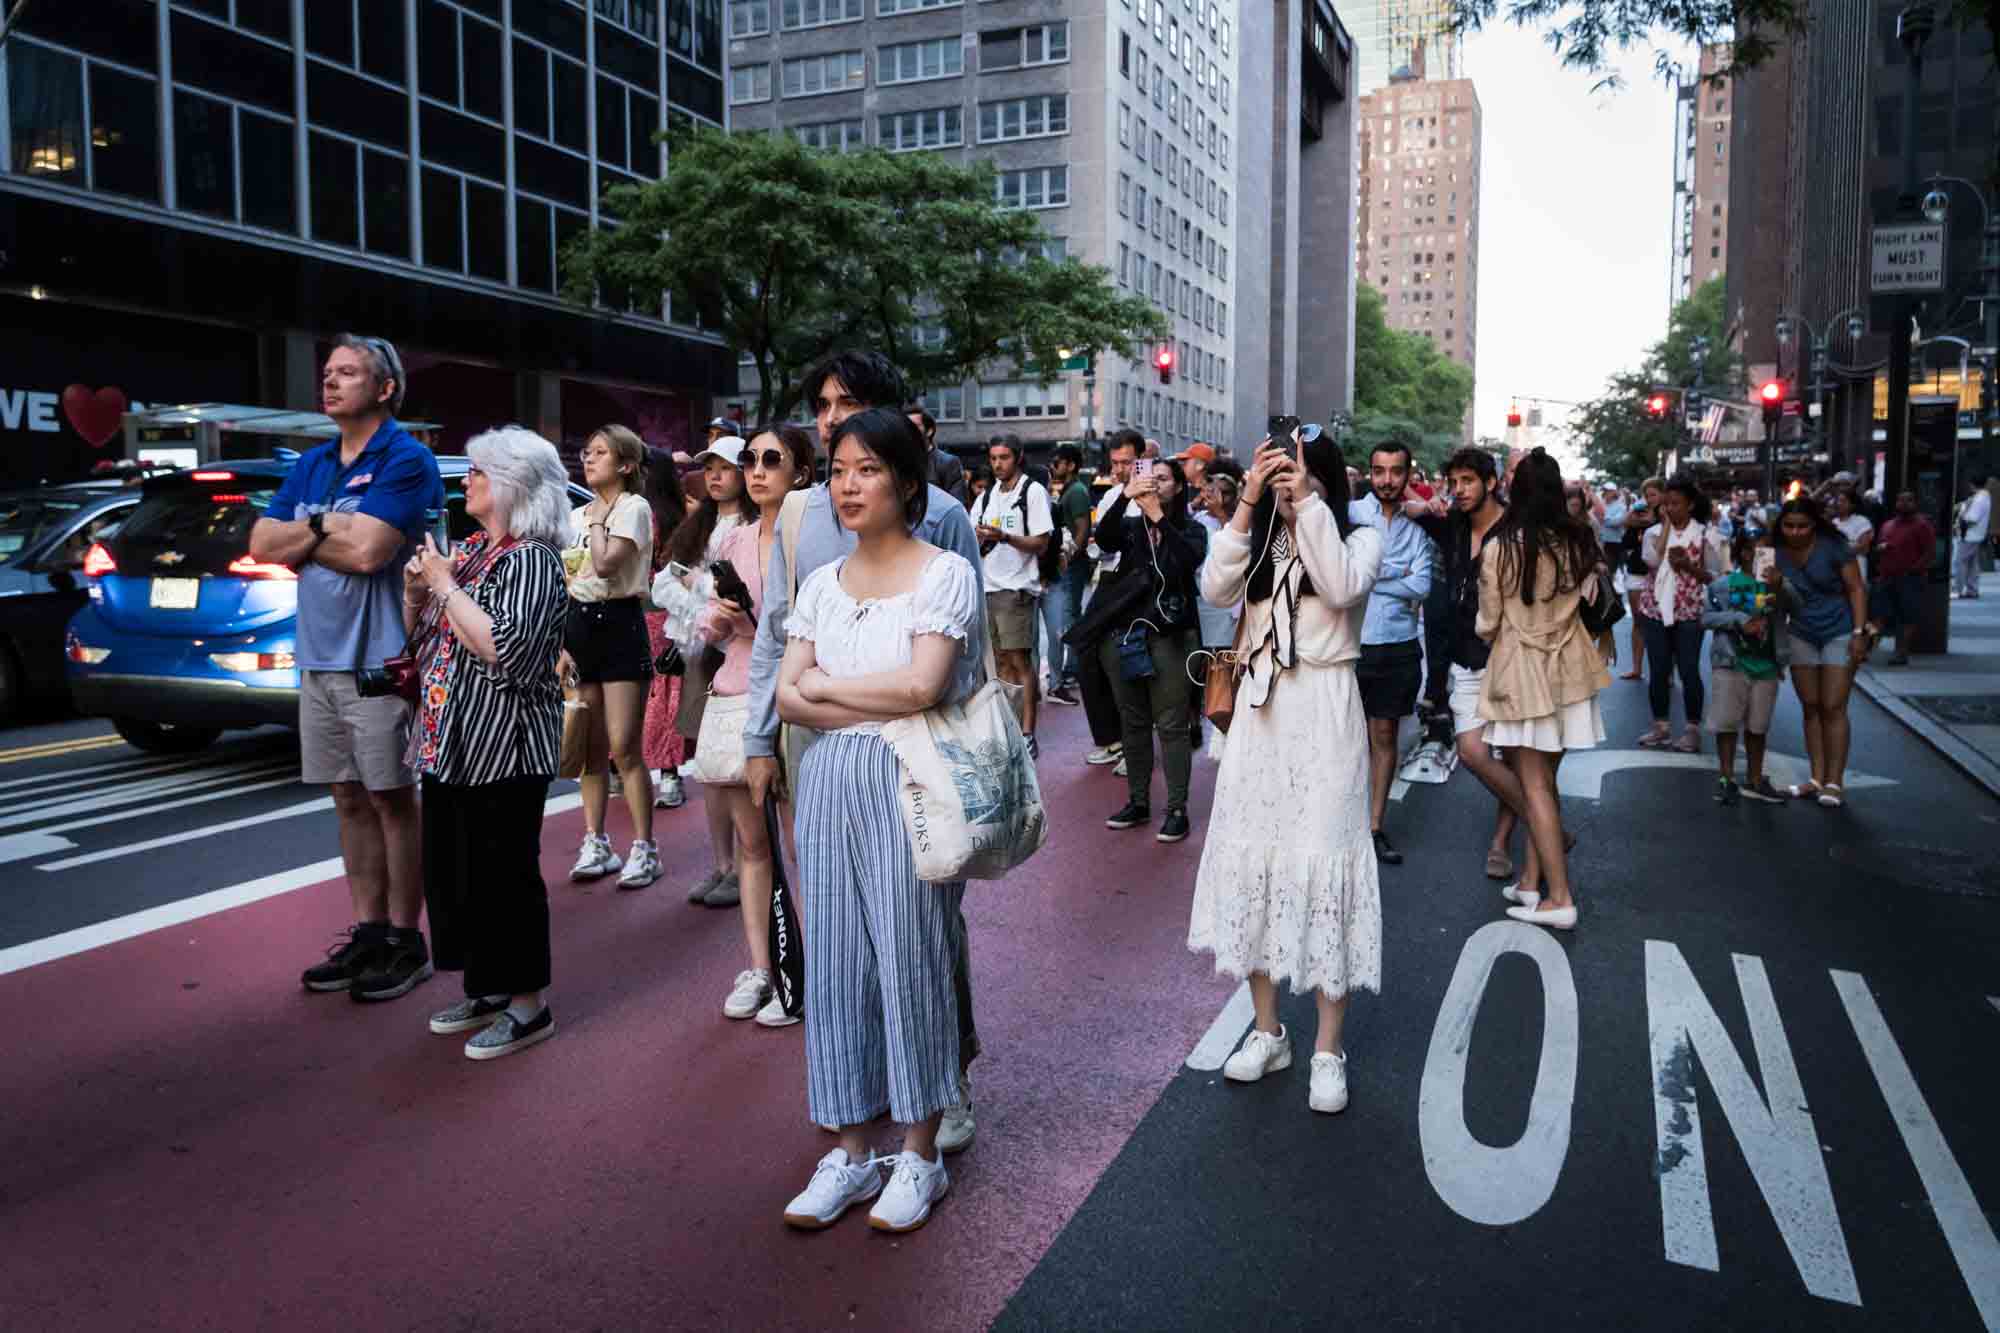 Tourists in a NYC street with cellphones in hand during Manhattanhenge